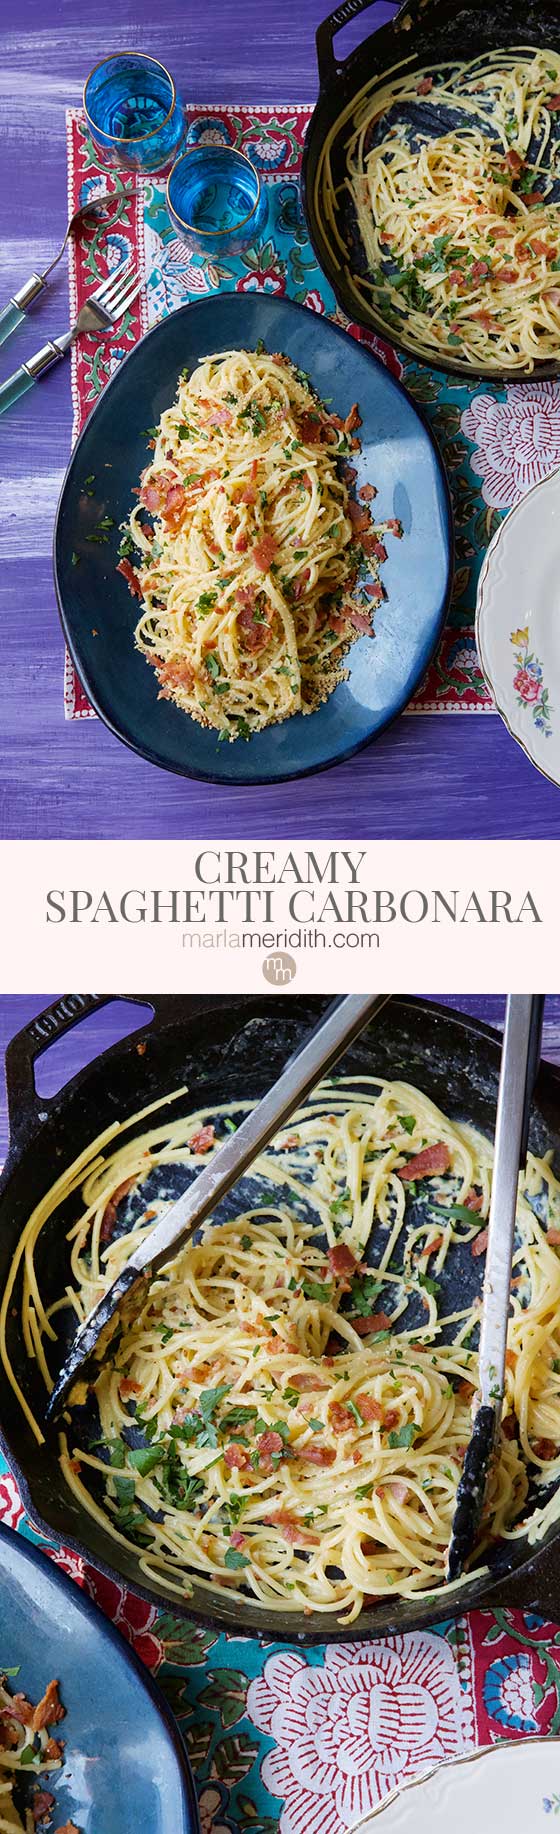 Cook up this easy and delicious Creamy Spaghetti Carbonara recipe for family dinners and entertaining. Ready in just 20 minutes! marlameridith.com